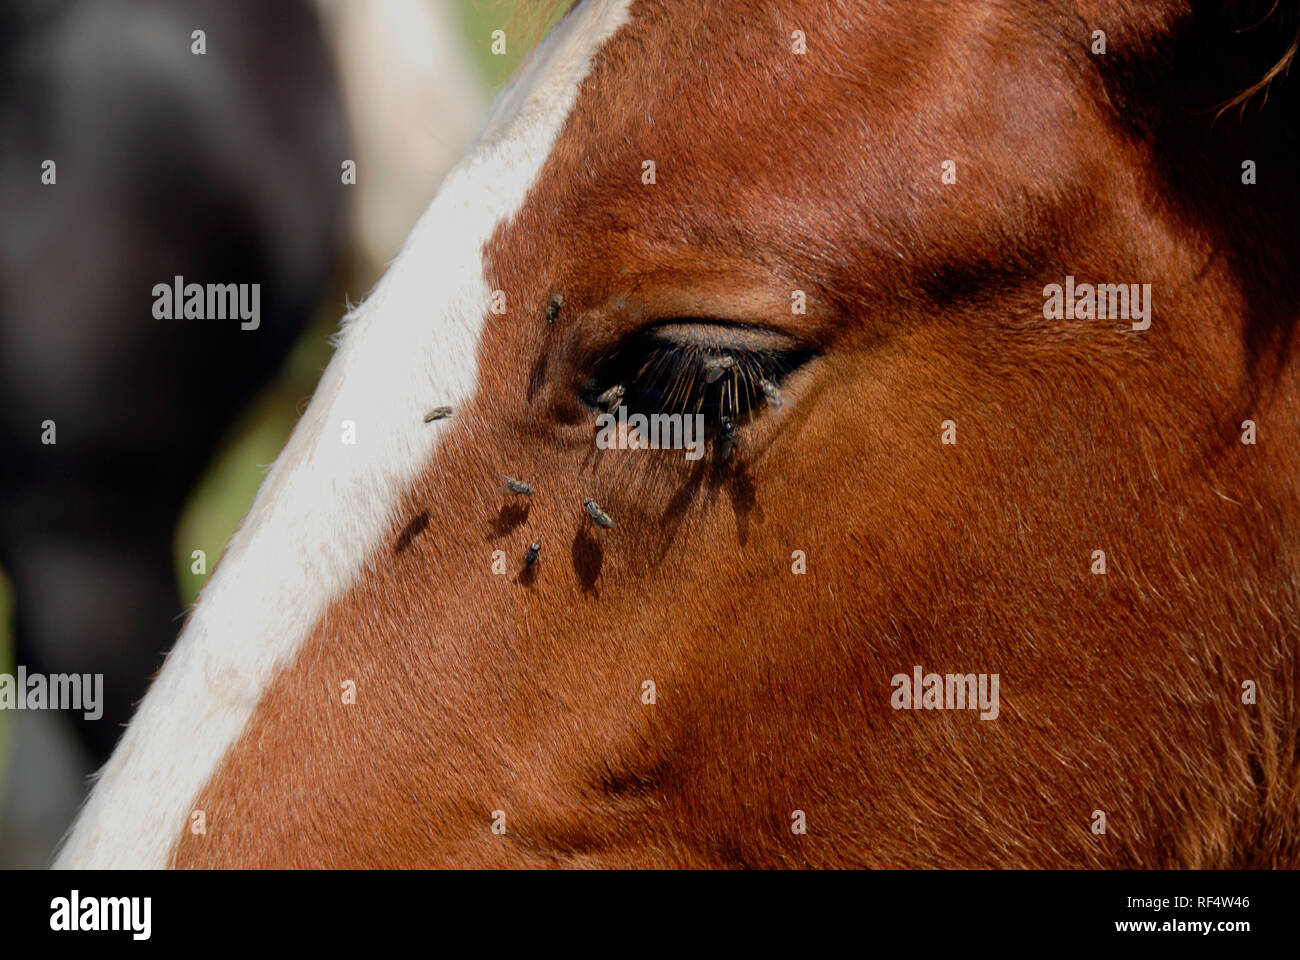 Flies around the face and eyes of a young horse. Stock Photo